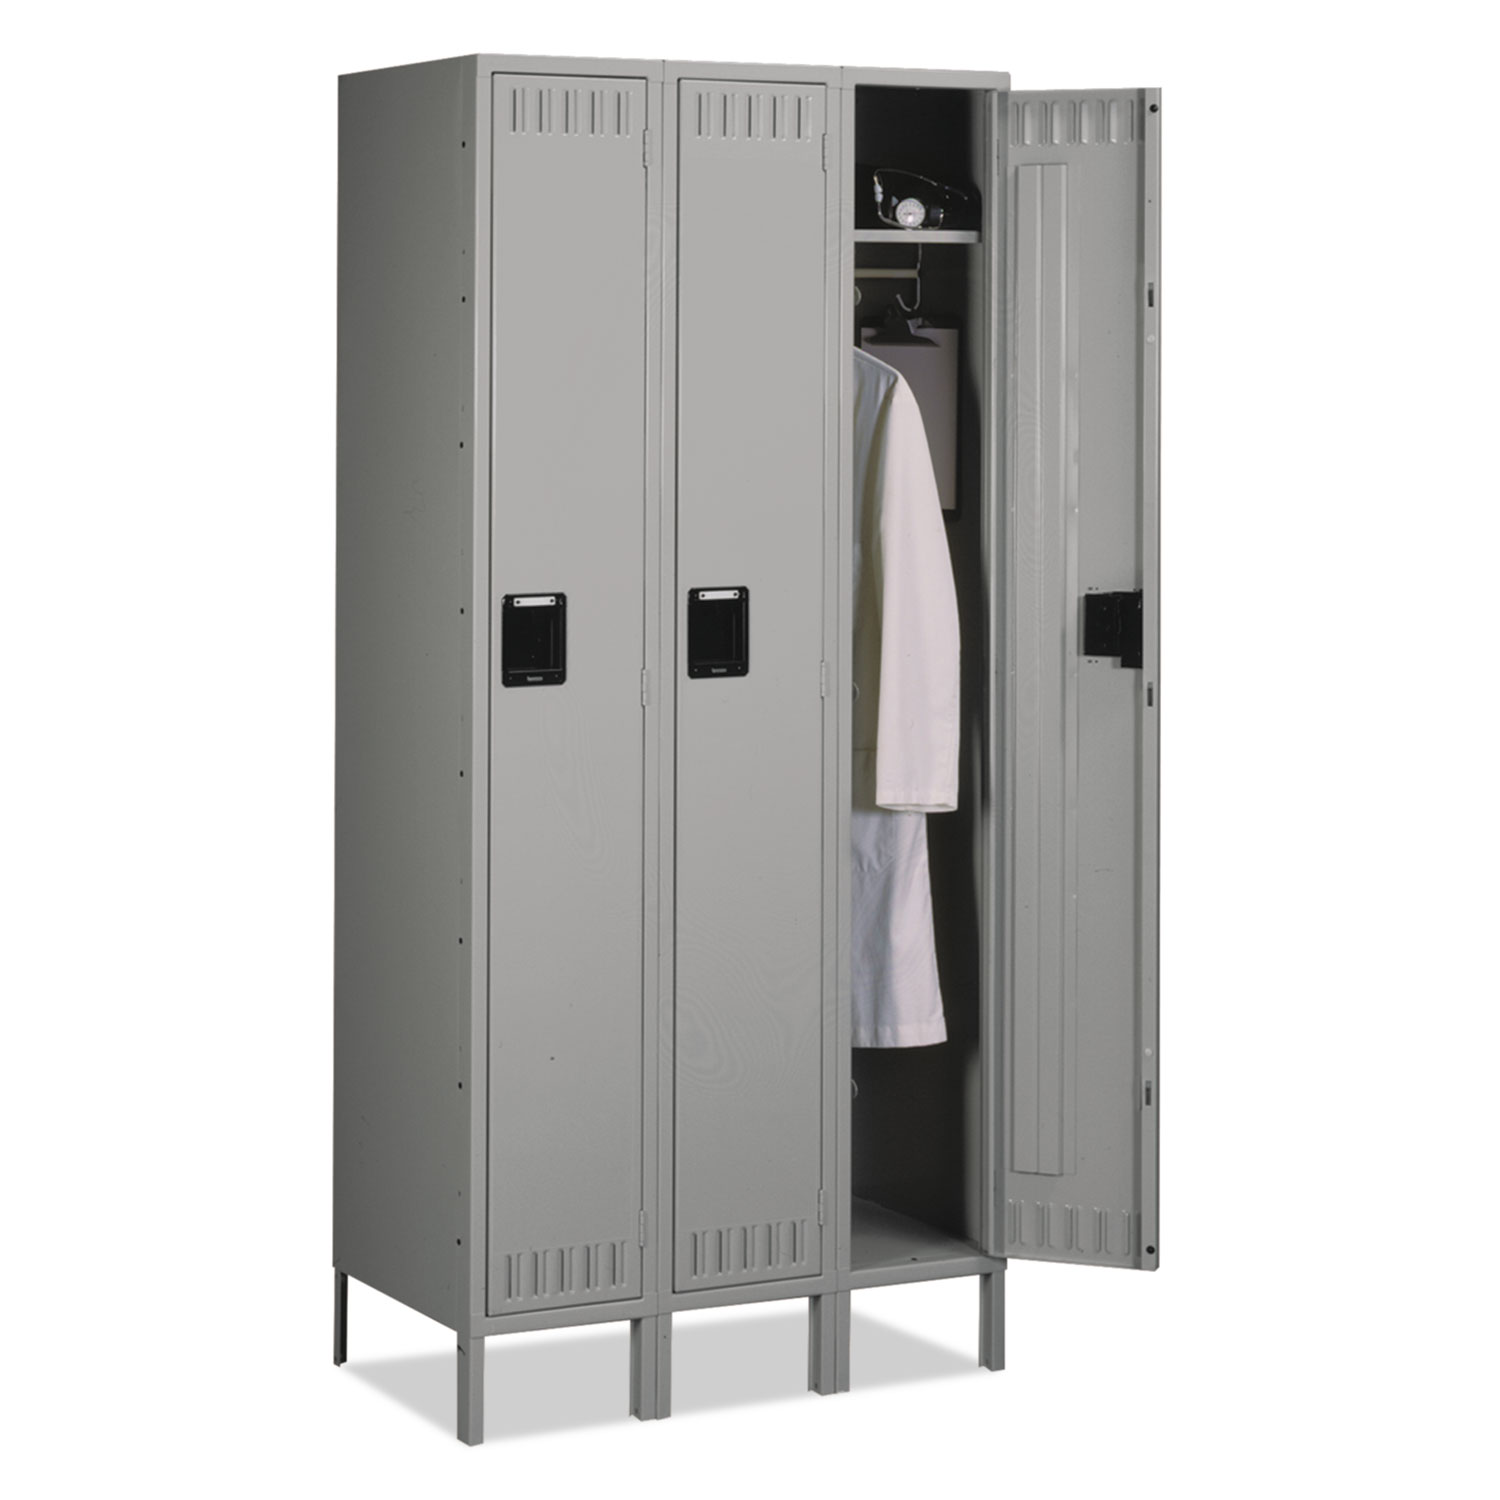 Single-Tier Isles Gray Medium 36w Legs, 78h, Shelves Three with Rods, Equipment x with x Coat 18d Hat Lockers Golden and Locker Office -